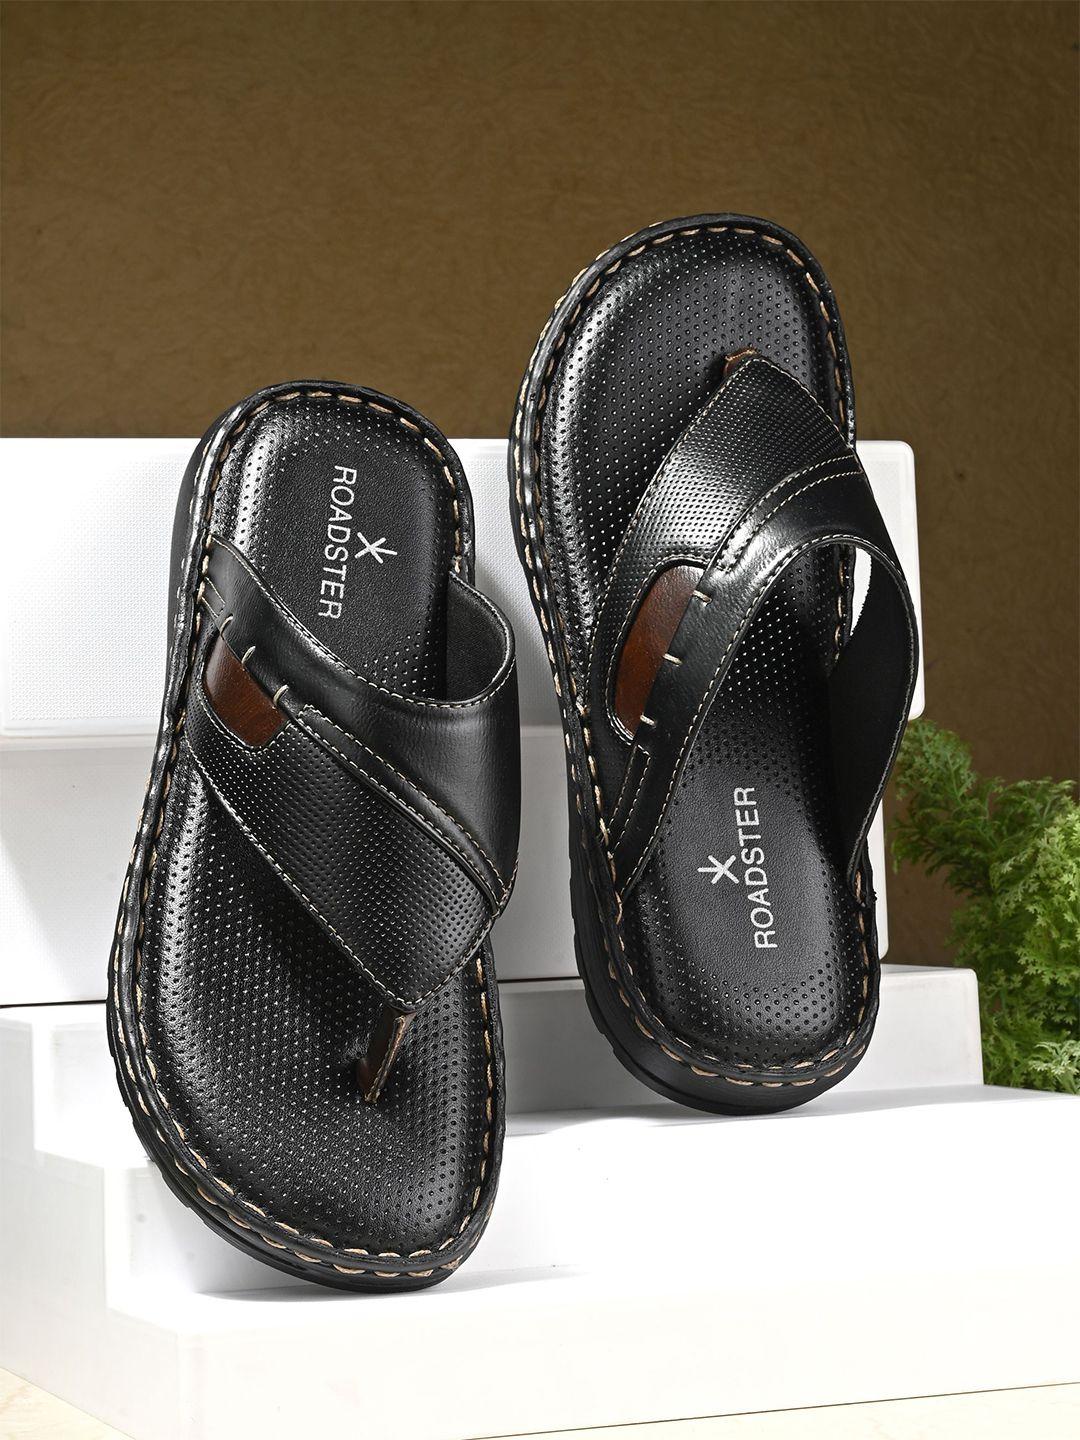 the roadster lifestyle co. black textured comfort sandals